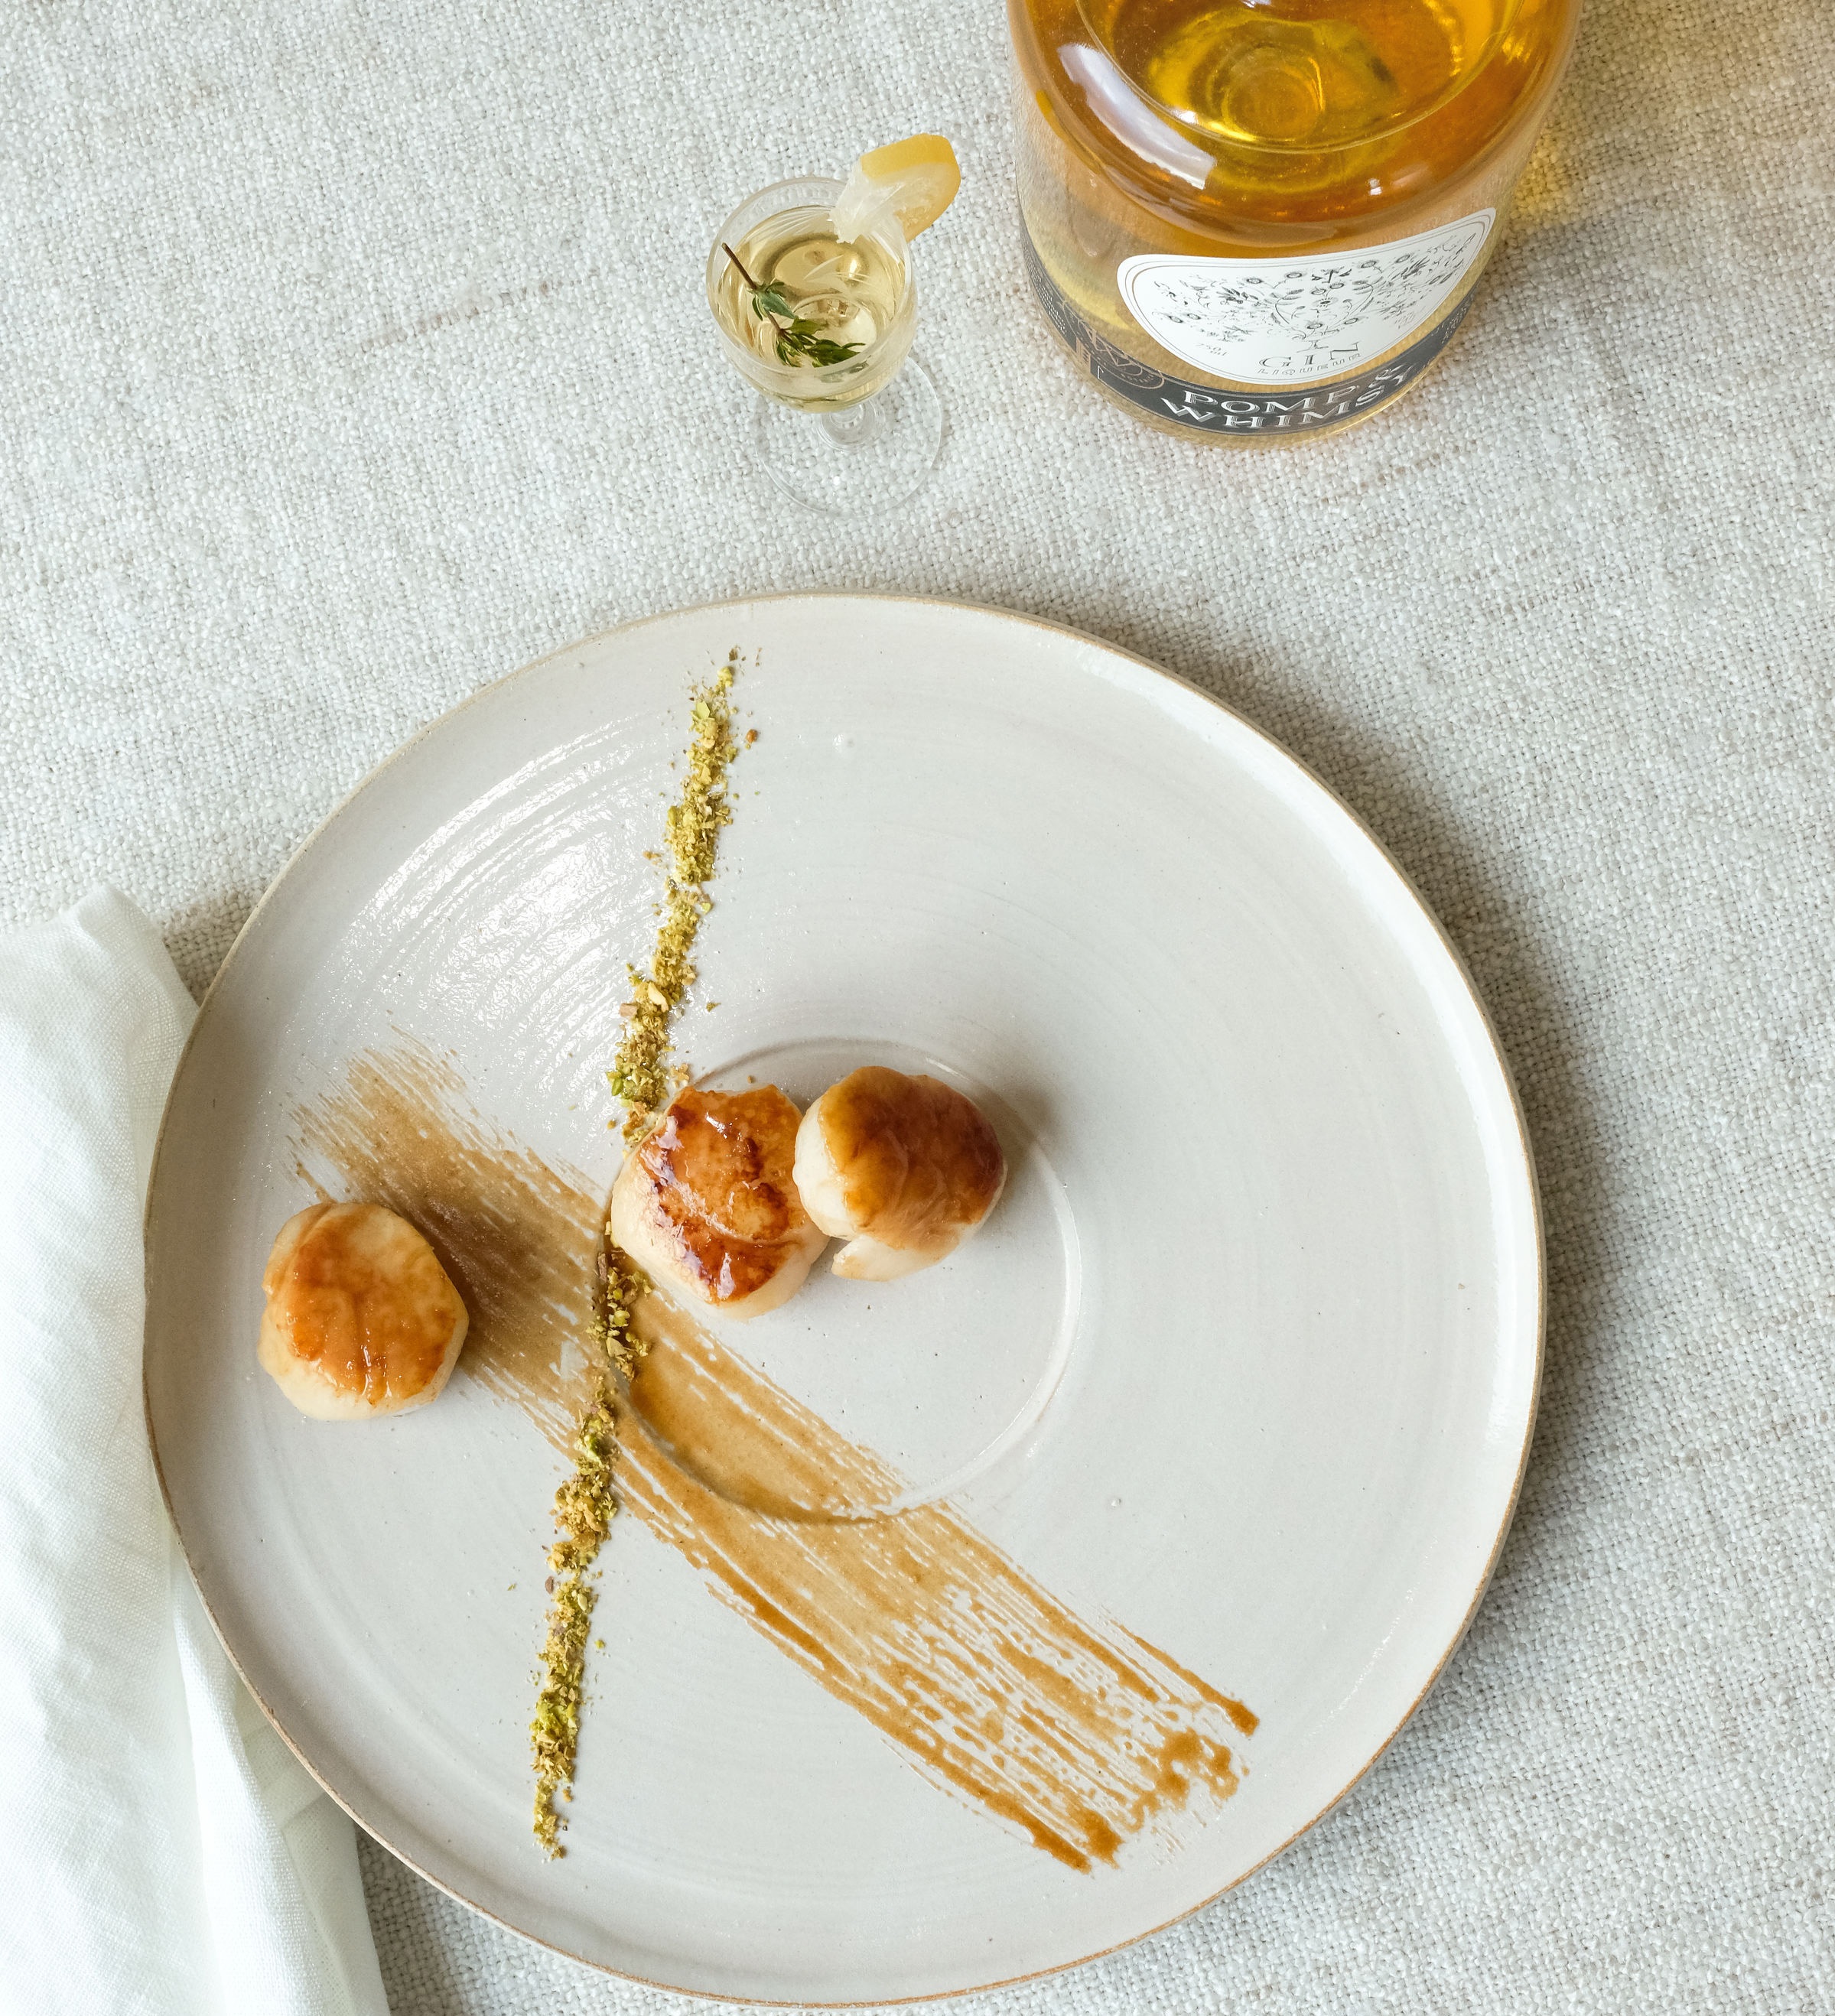 Seared Scallops in Brown Butter Pomp &amp; Whimsy Pan Sauce (Bessie Lacap Photography)